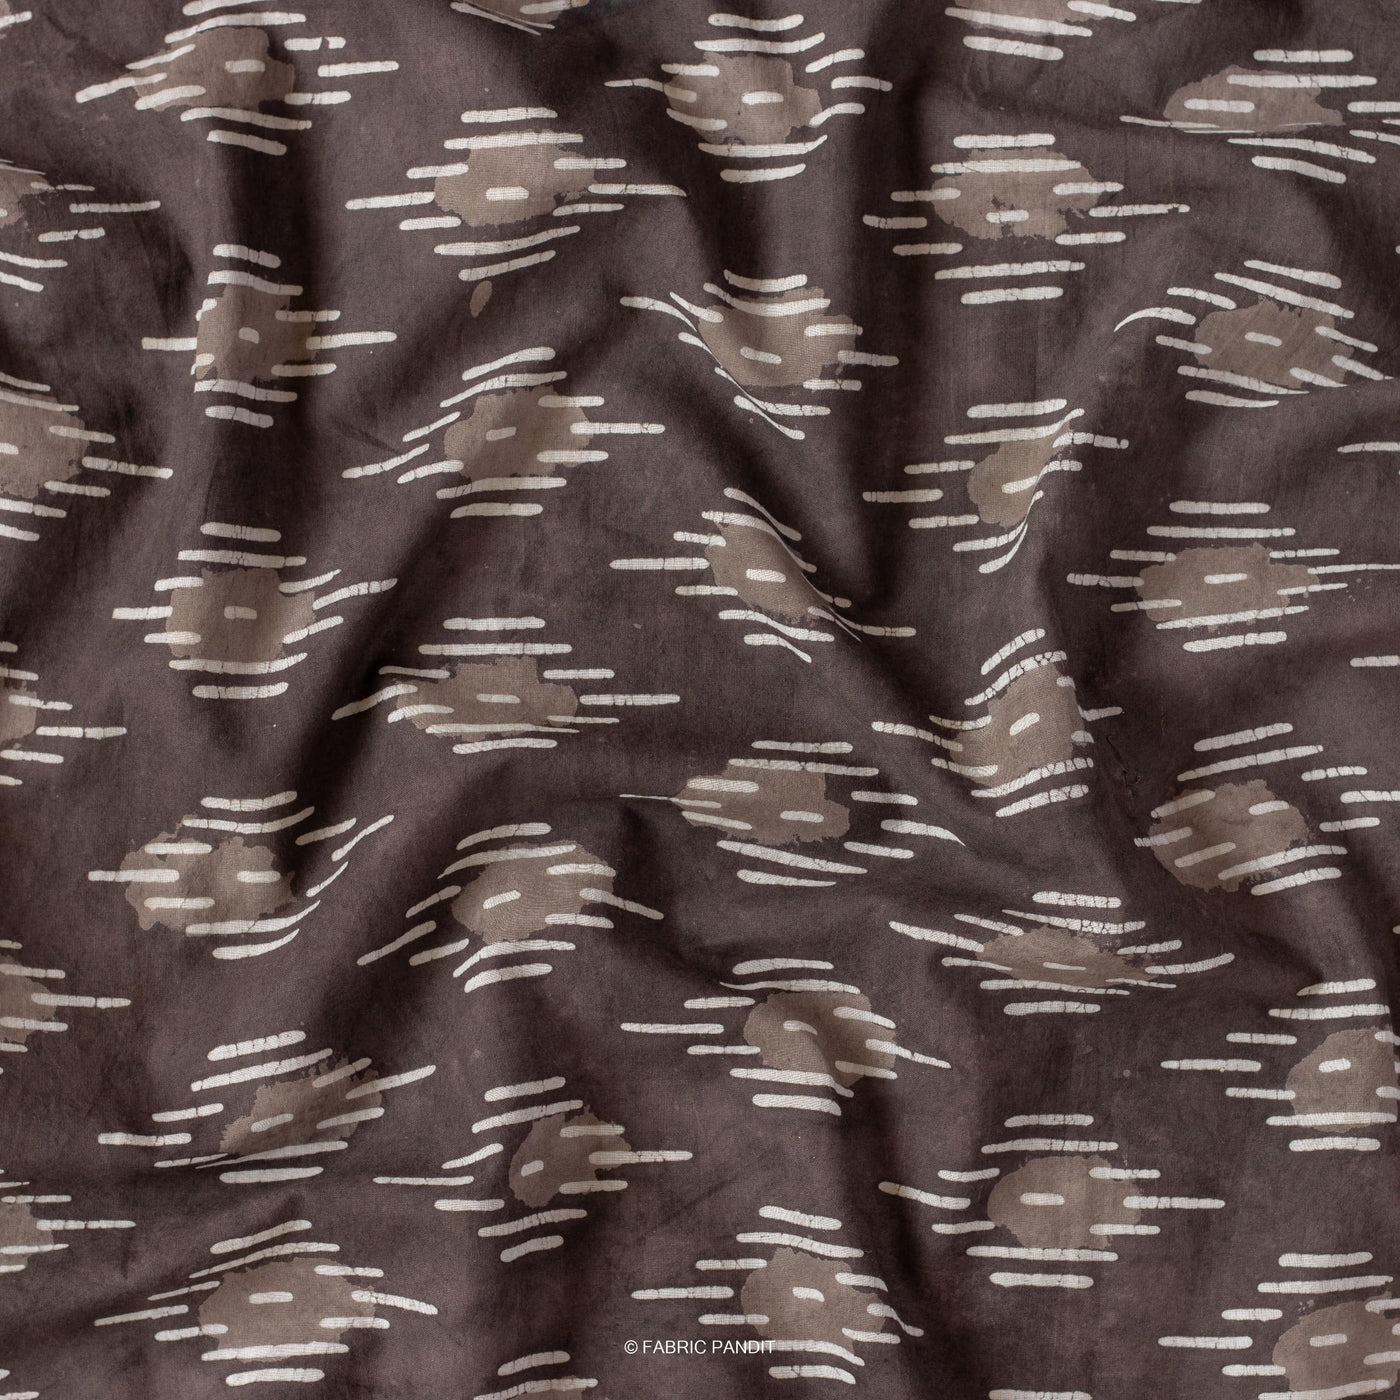 Fabric Pandit Fabric Brown Indigo Dabu Natural Dyed Geometrical Abstract Printed Pure Cotton Fabric (Width 44 Inches)